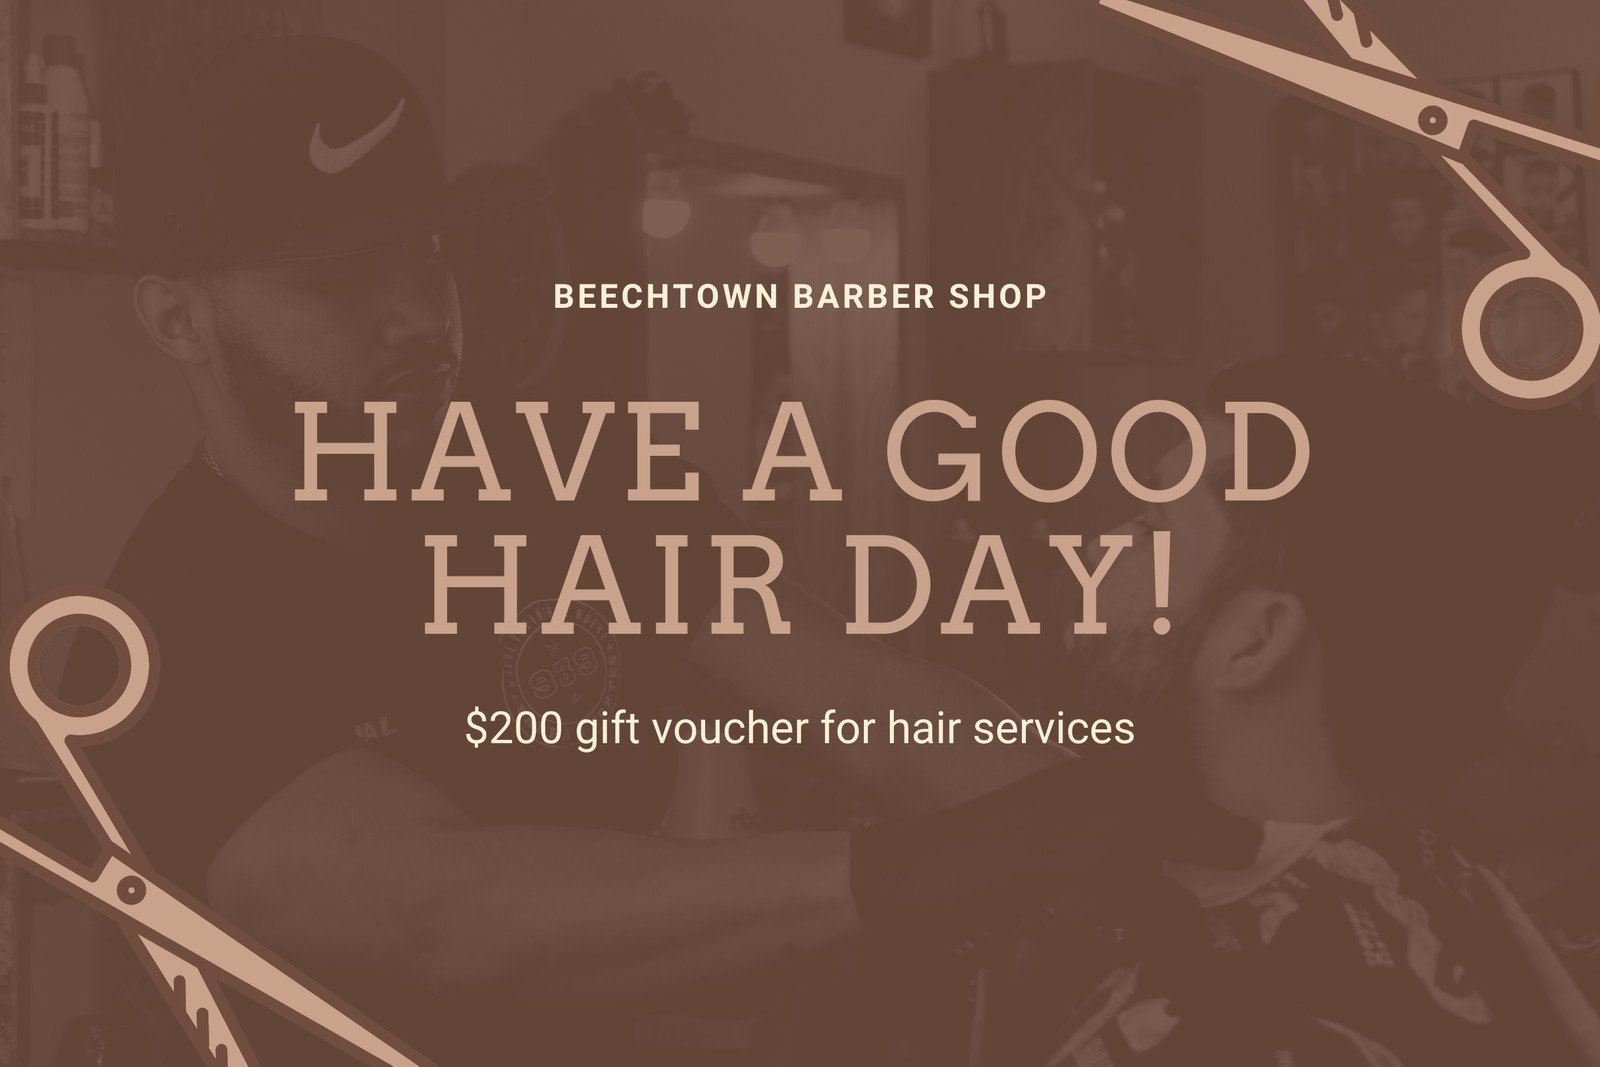 hairstylists K9295GB Gift vouchers for hair salons hairdressers 